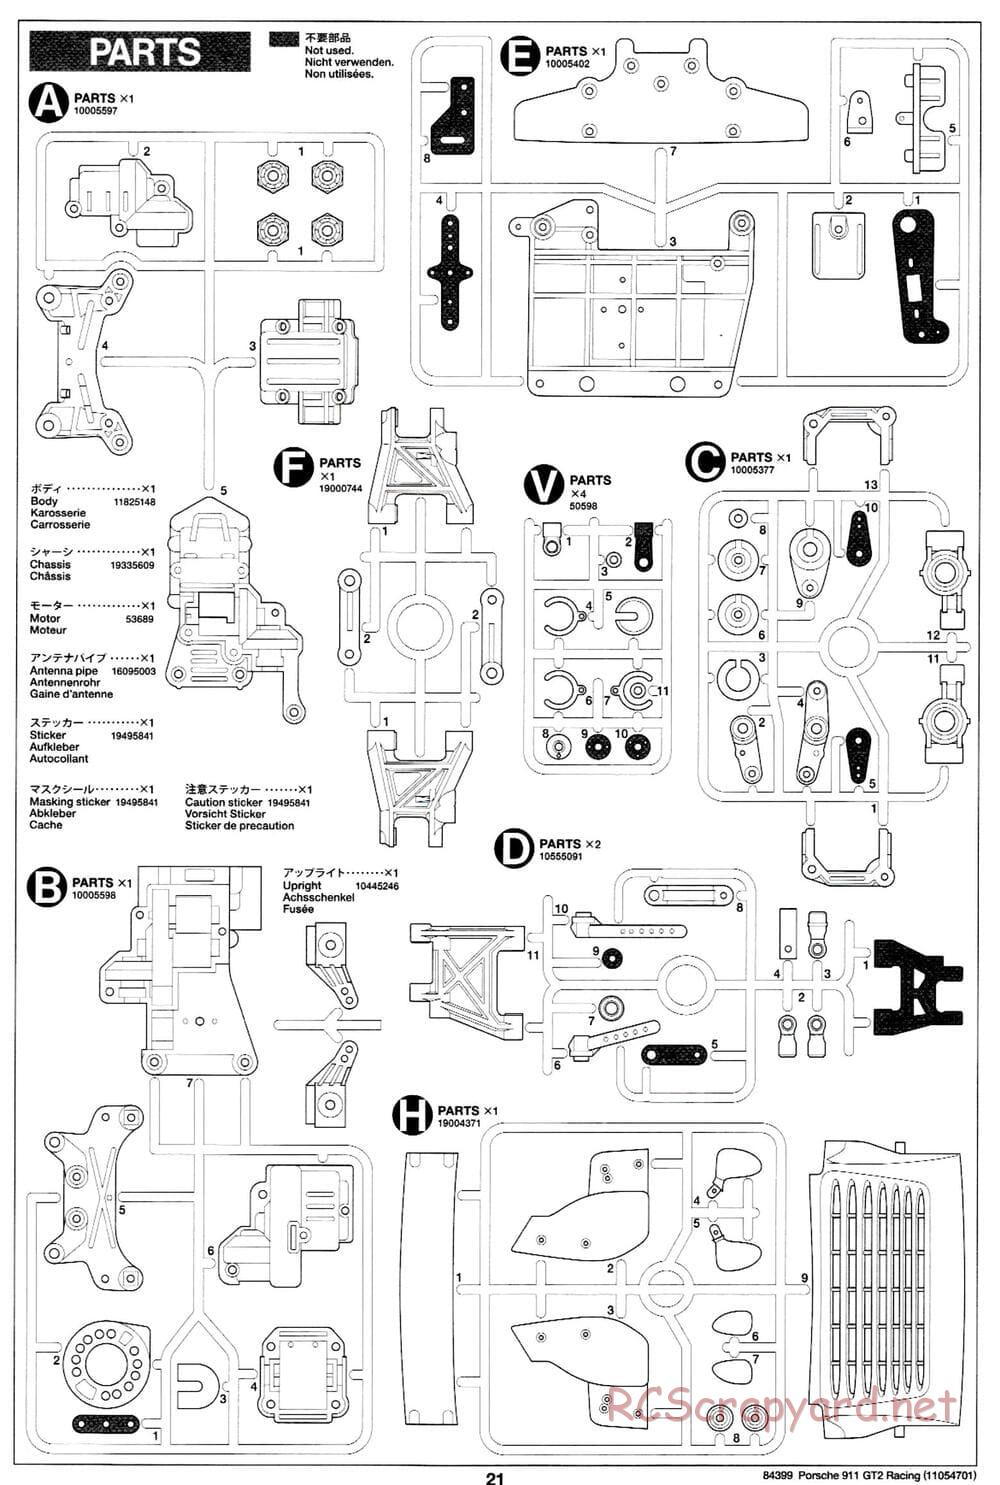 Tamiya - Porsche 911 GT2 Racing - TA02SW Chassis - Manual - Page 21